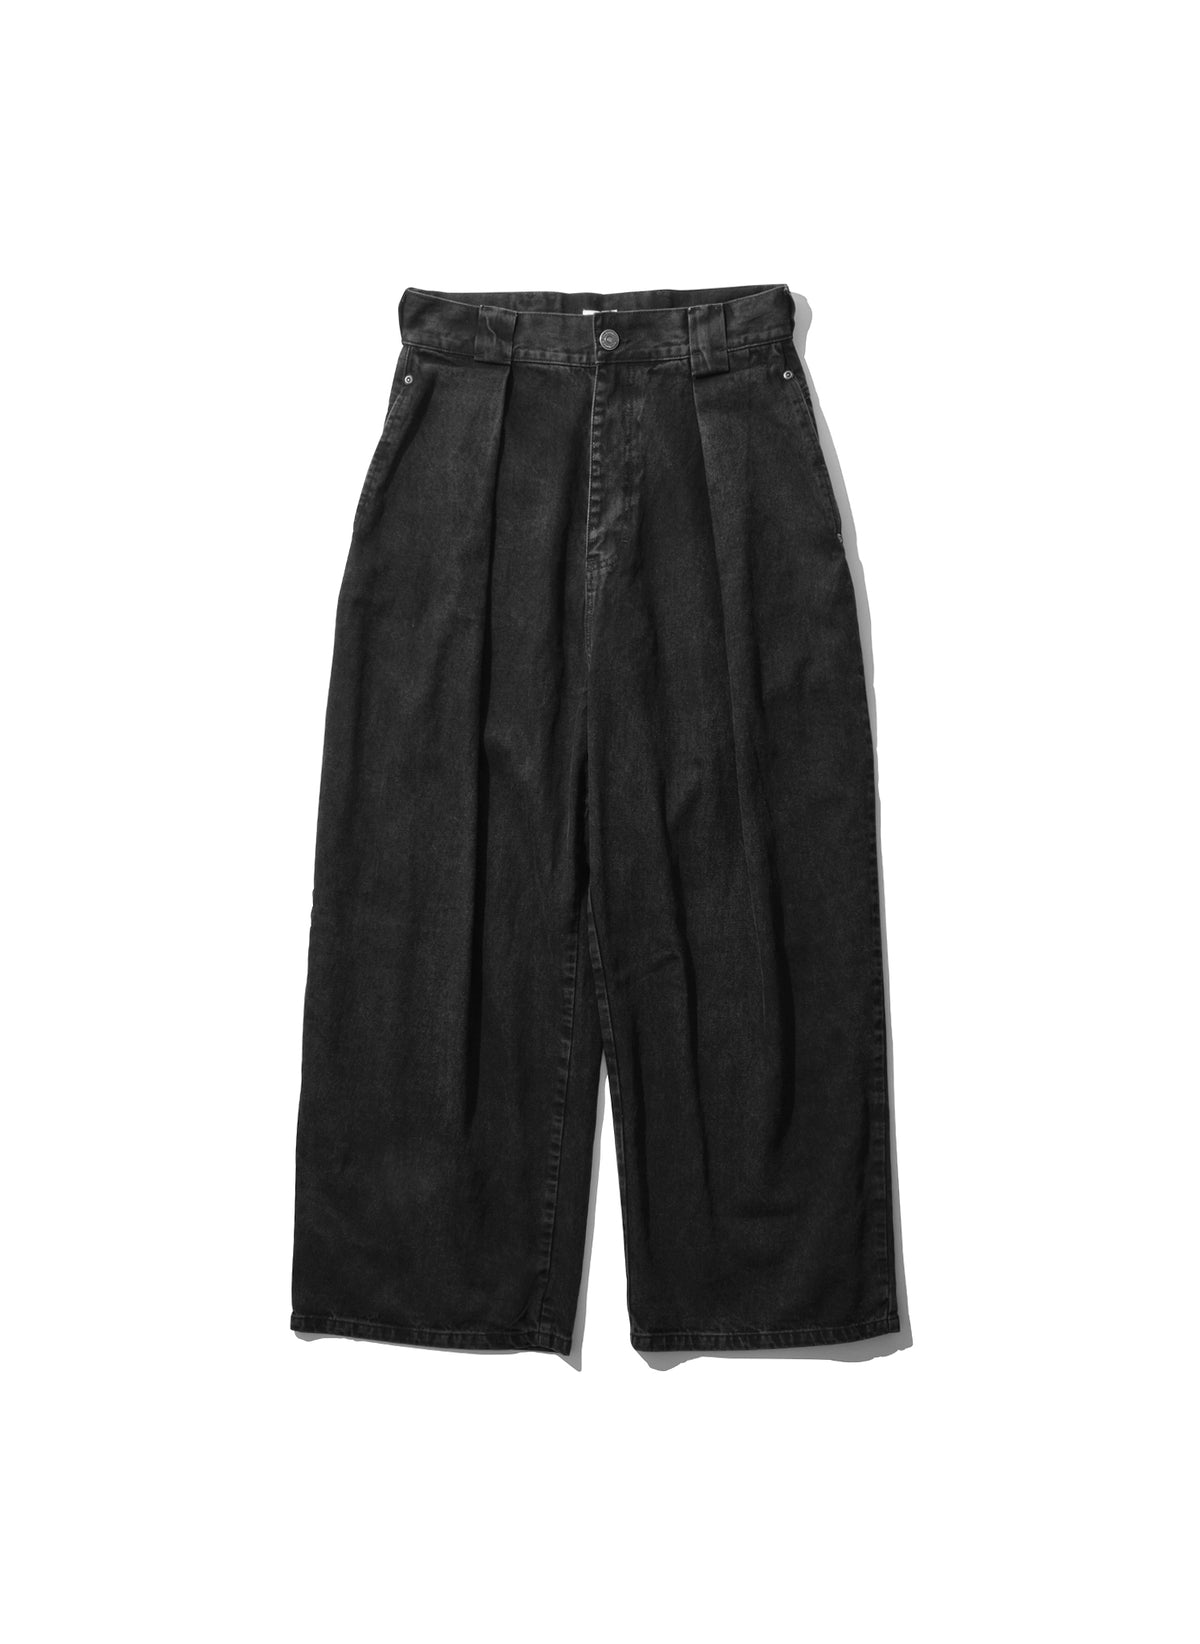 WILLY CHAVARRIA / SILVERLAKE TUCK JEAN WASHED BLACK